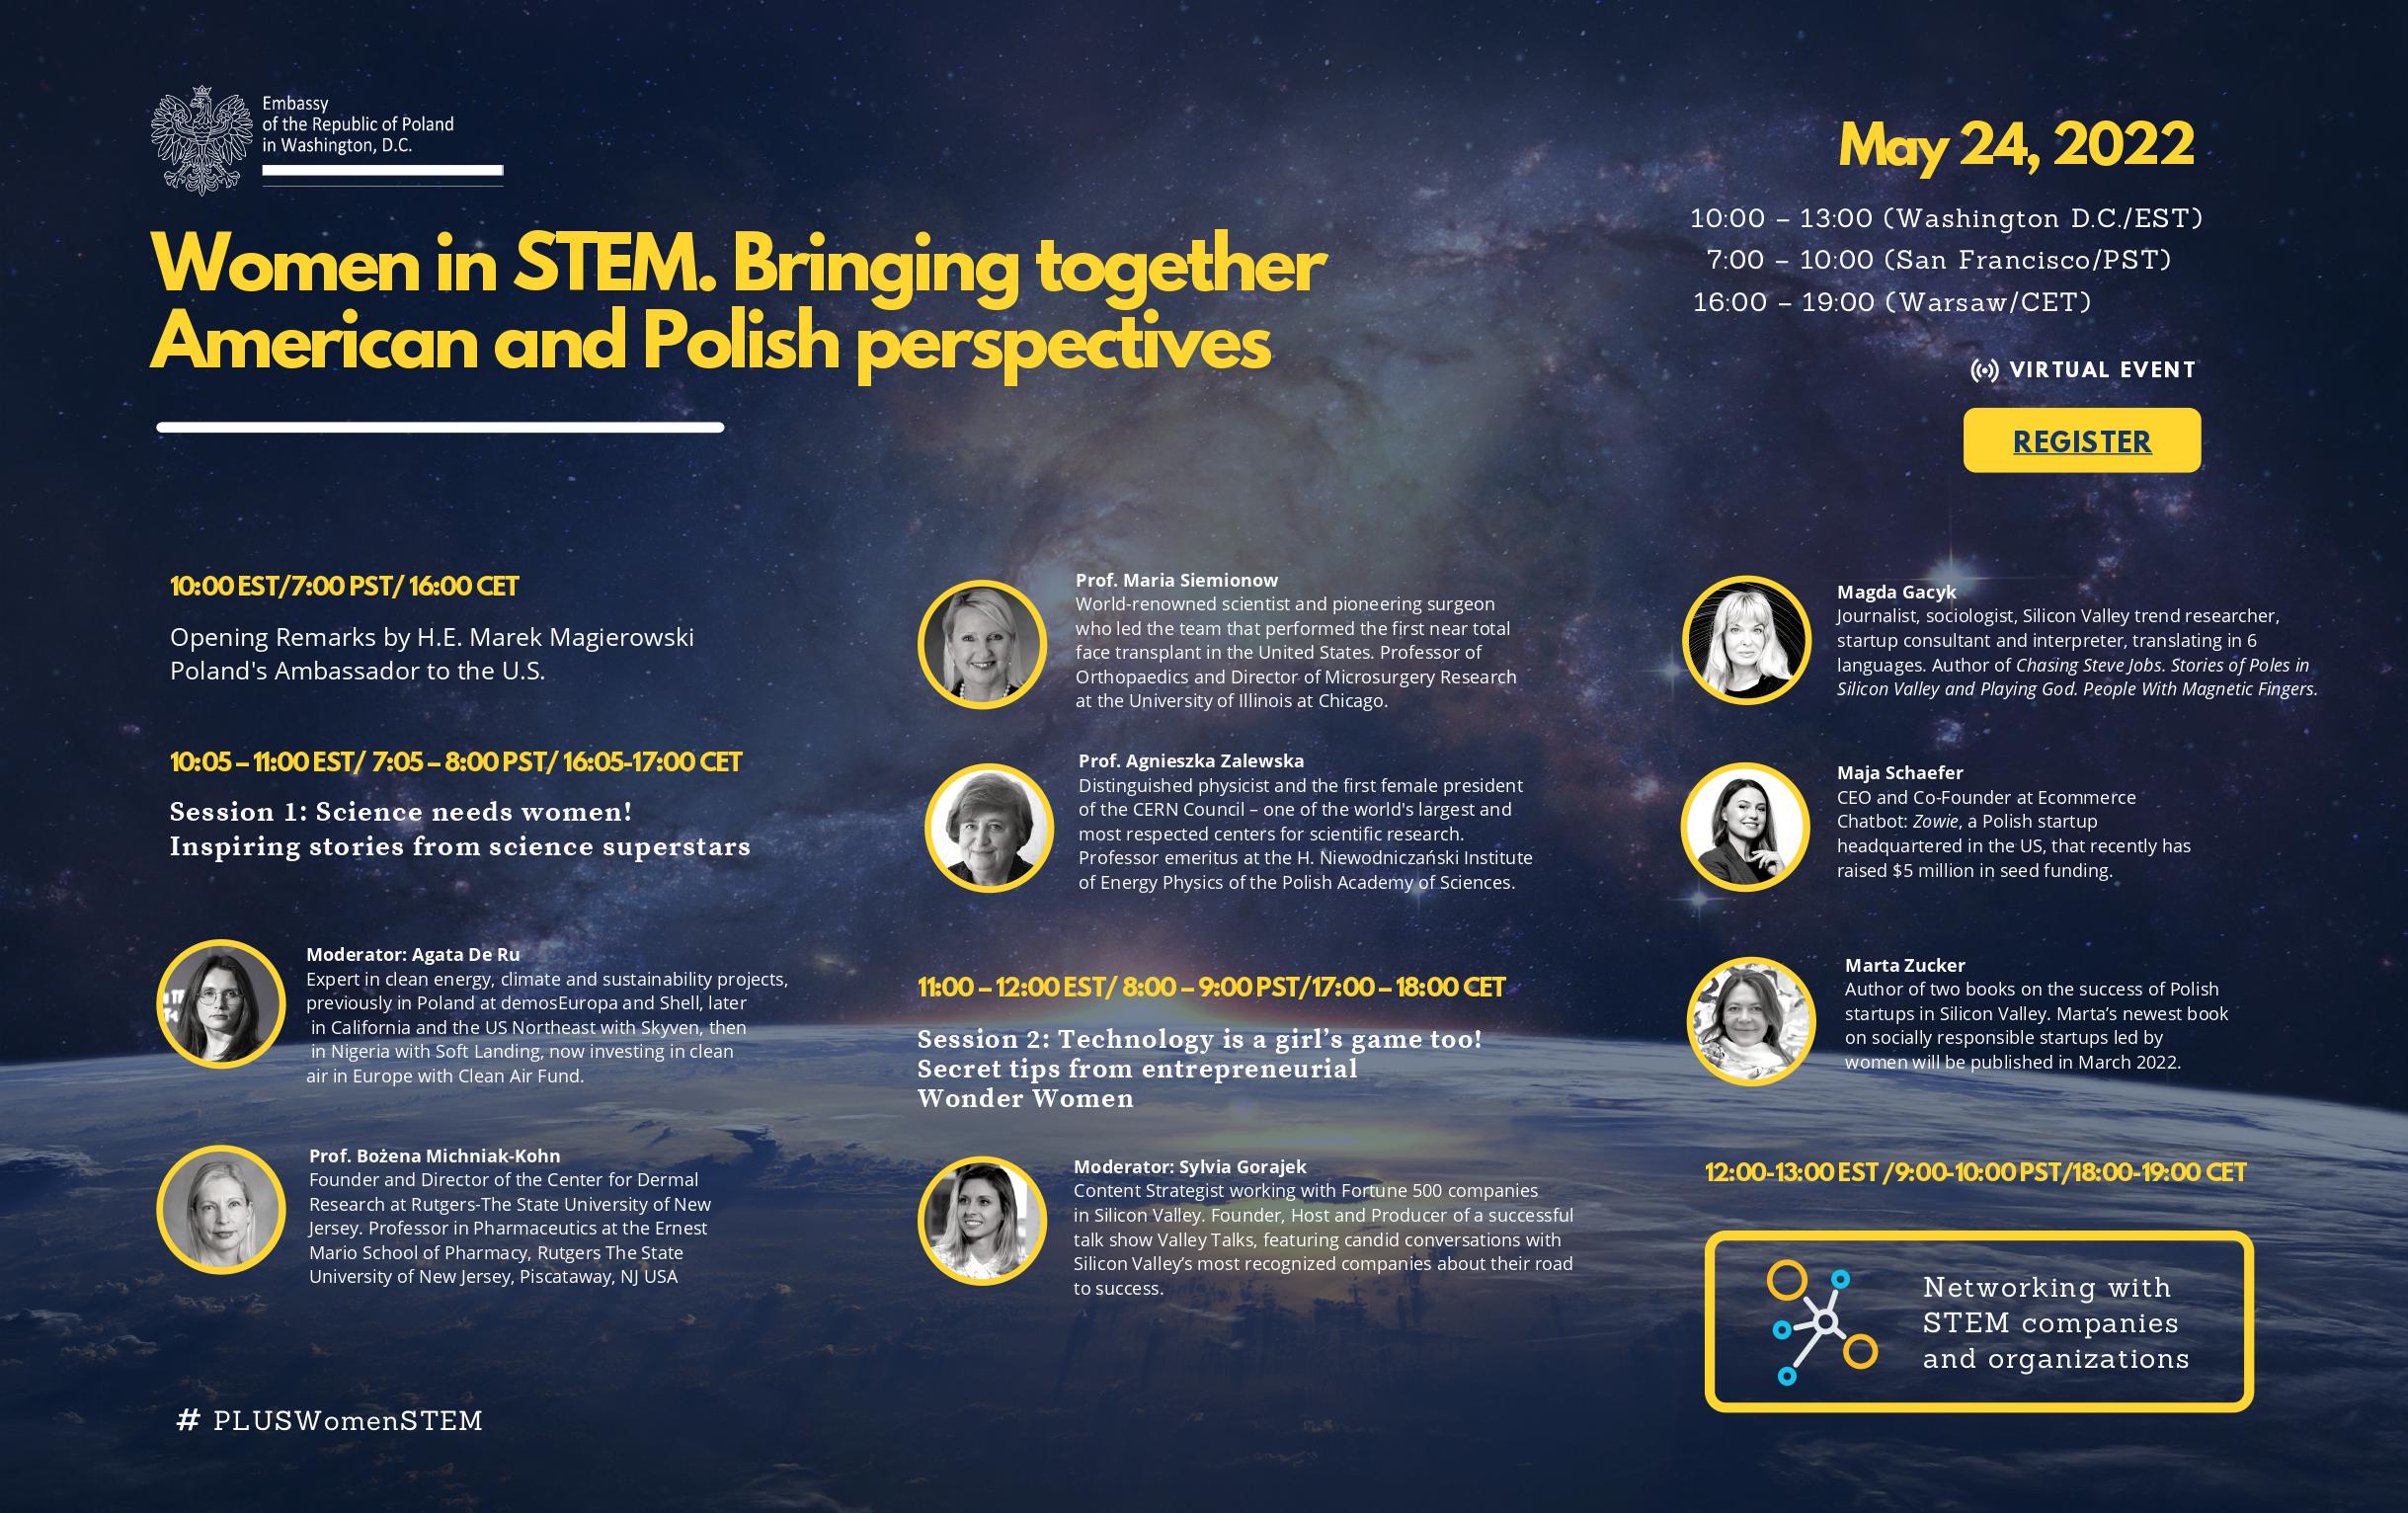 Women in STEM. Bringing together American and Polish perspectives